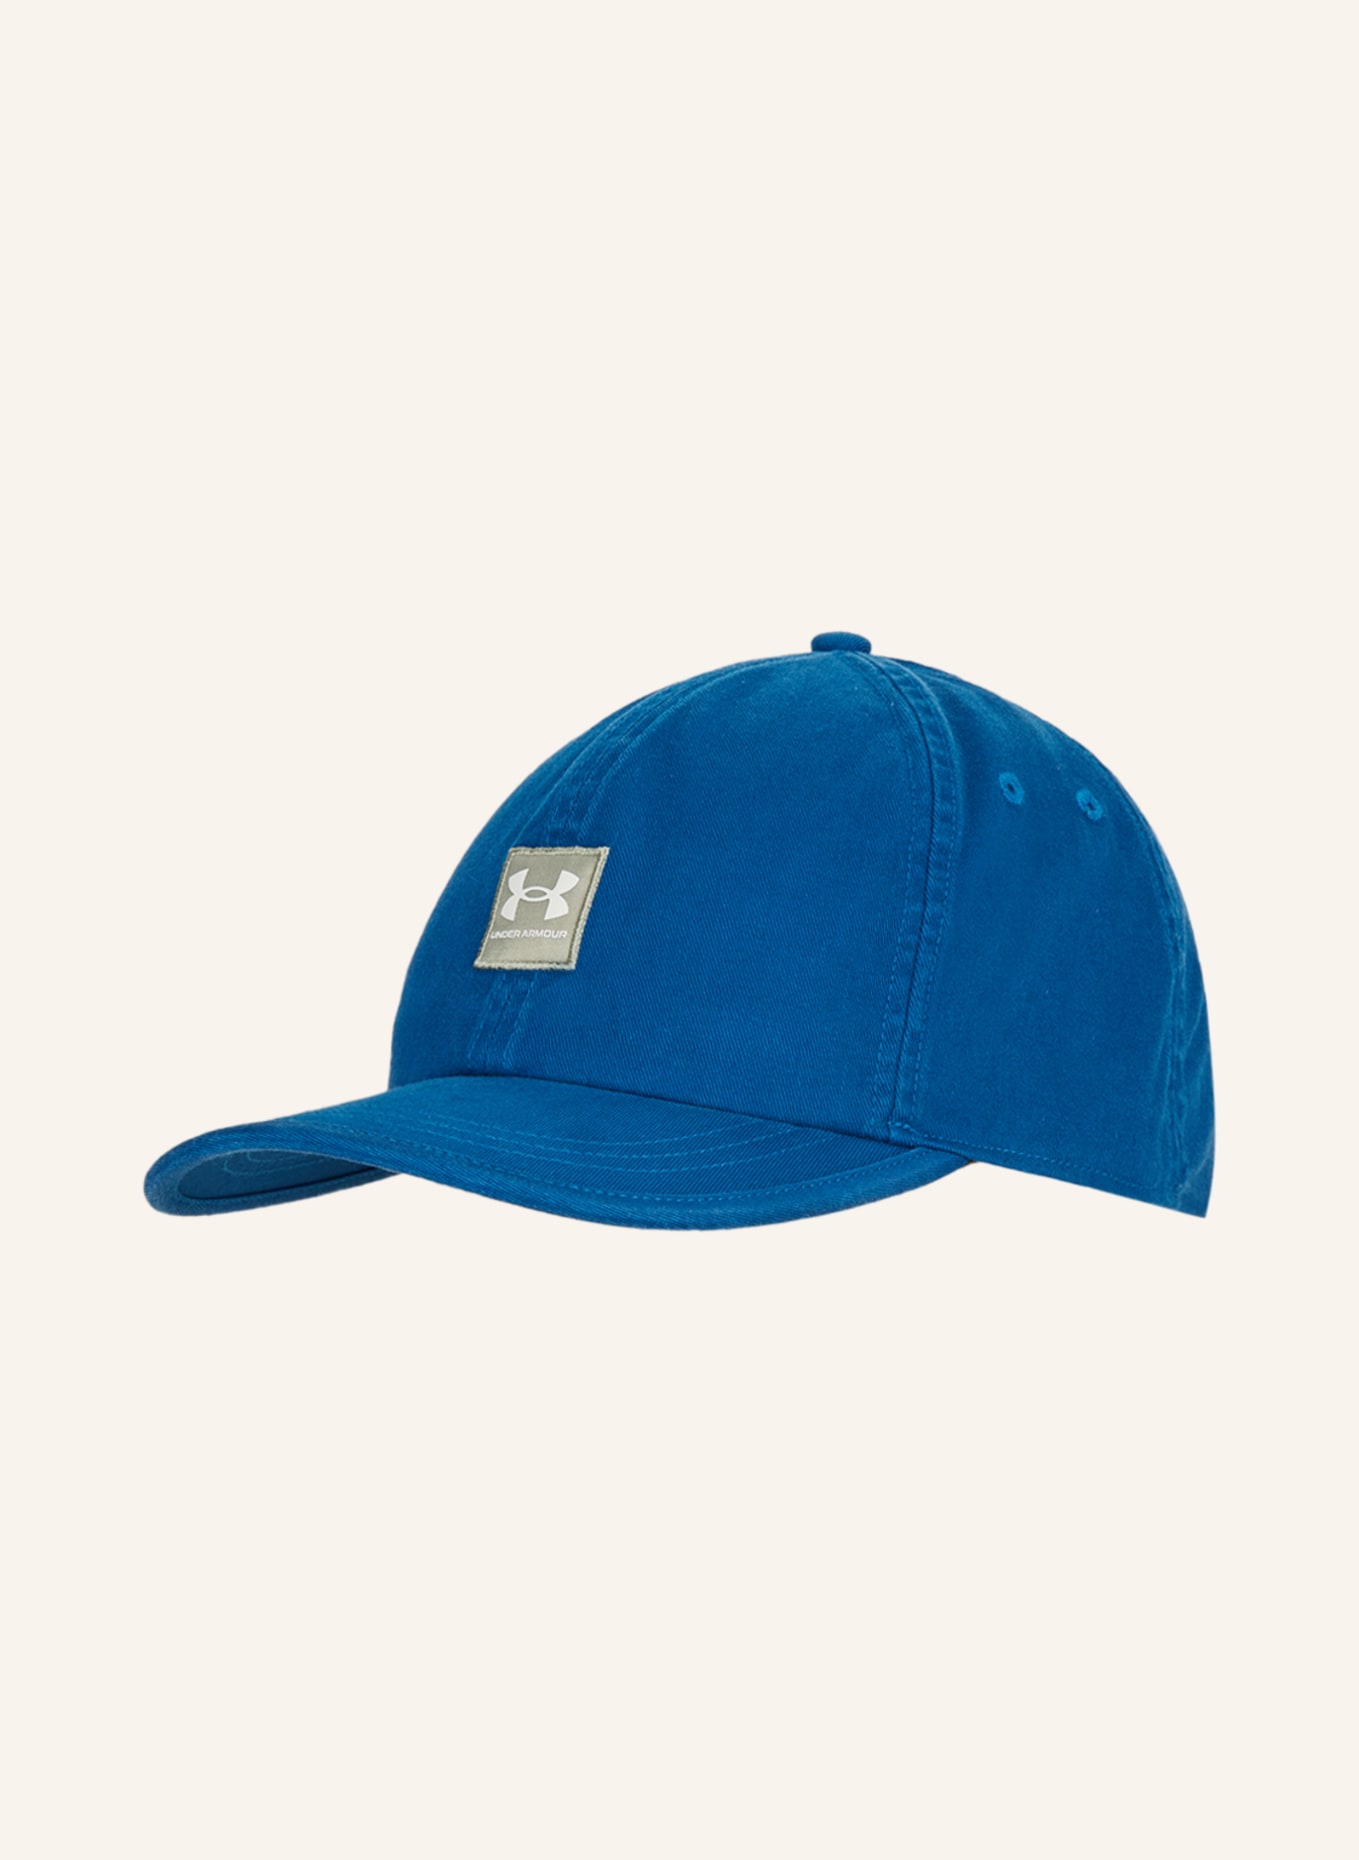 UNDER ARMOUR Cap UA BRANDED SNAPBACK in blue